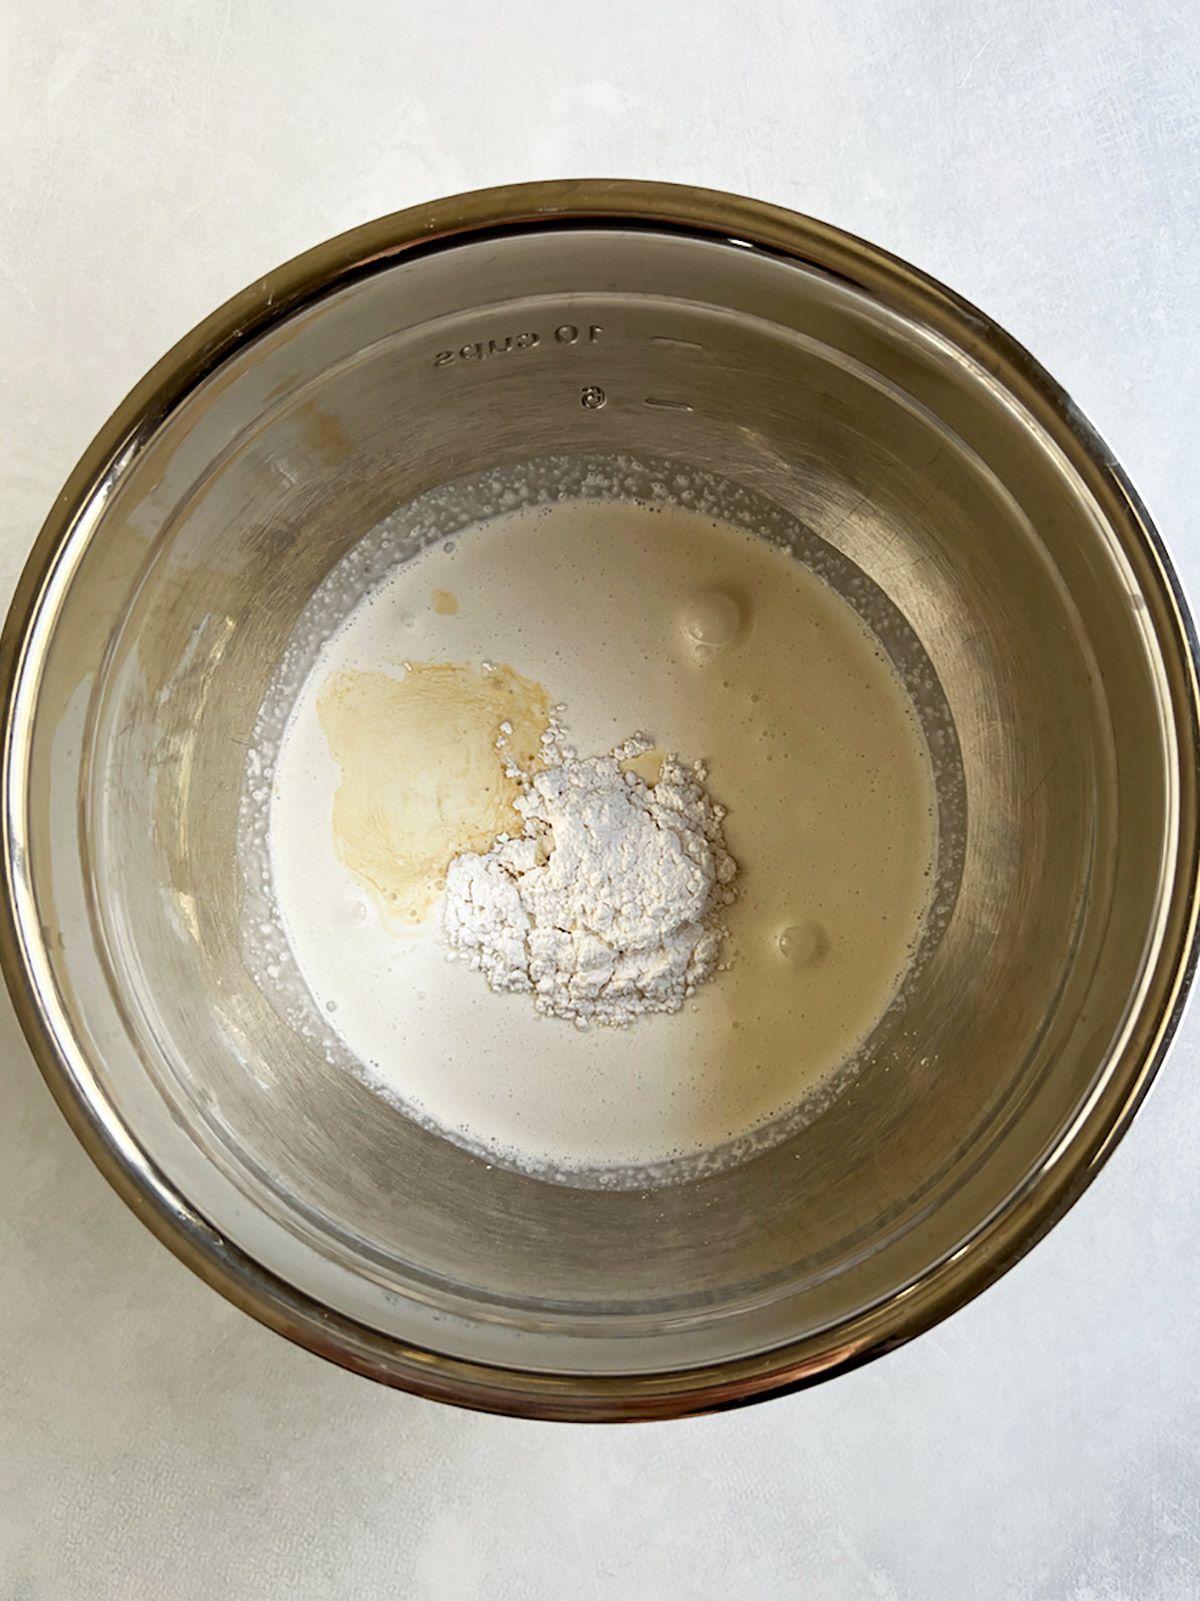 Whipped cream ingredients in a large stainless steel bowl.